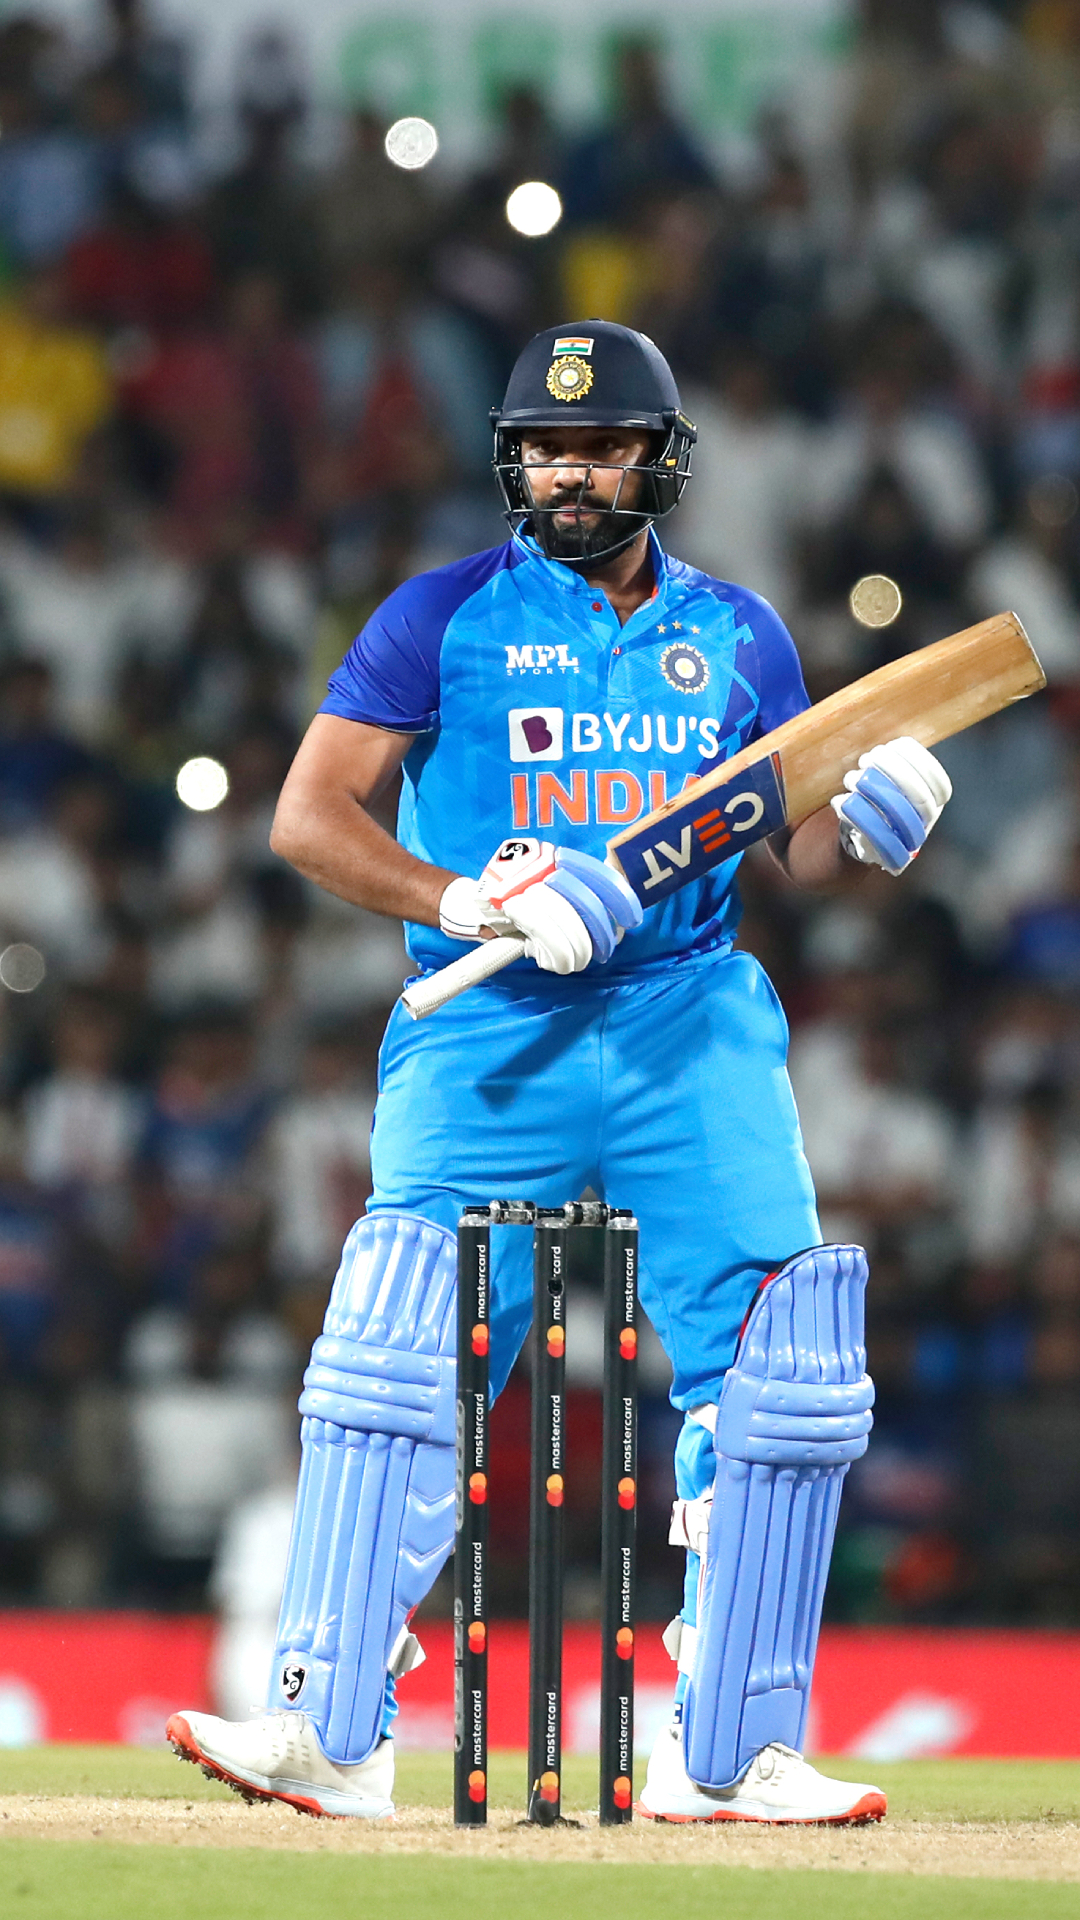 Let's look at Rohit Sharma's performance against South Africa in his previous 5 T20Is